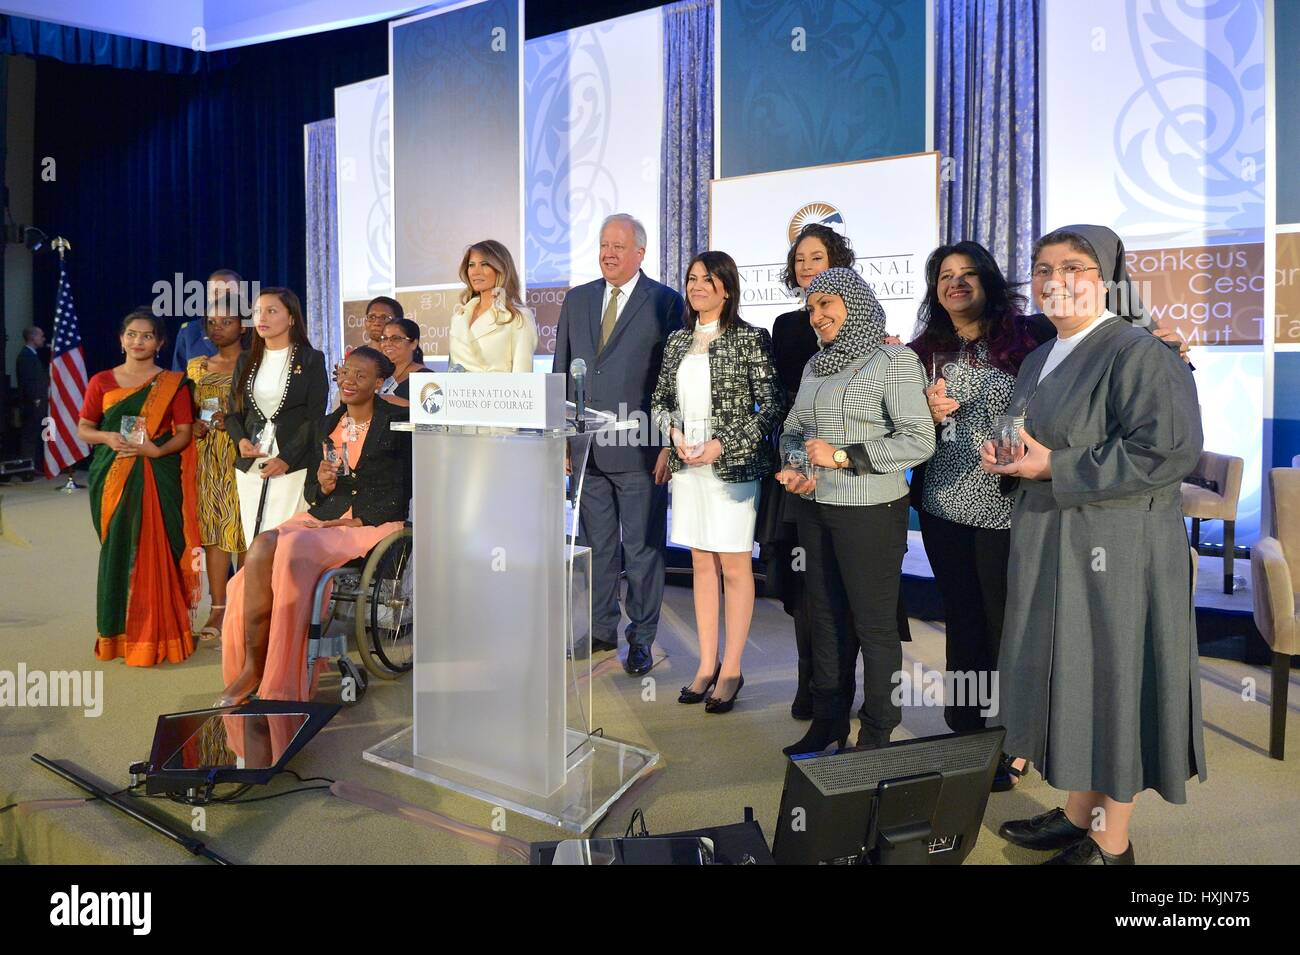 U.S. First Lady Melania Trump and Under Secretary of State for Political Affairs Thomas Shannon pose for a photo with the 2017 Secretary of State International Women of Courage Awardees during a ceremony March 29, 2017 in Washington, DC The 2017 awardees are Sharmin Akter, Activist Against Early/ Forced Marriage, Bangladesh; Malebogo Molefhe, Human Rights Activist, Botswana; Natalia Ponce de Leon, President, Natalia Ponce de Leon Foundation, Colombia; Rebecca Kabugho, Political and Social Activist, Democratic Republic of Congo; Jannat Al Ghezi, Deputy Director of The Organization of Women's Stock Photo